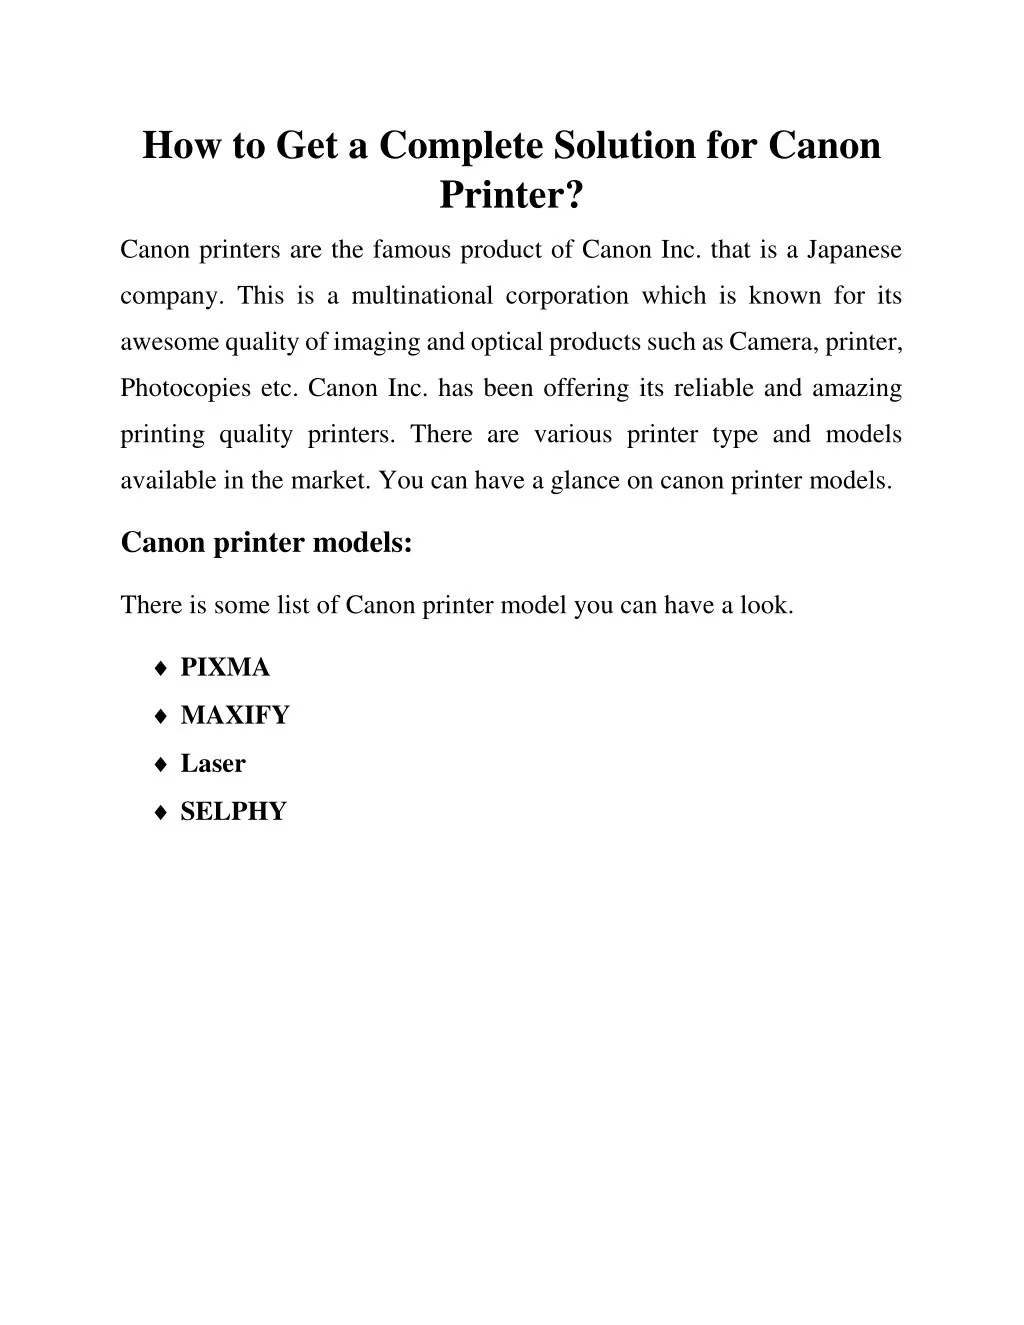 how to get a complete solution for canon printer